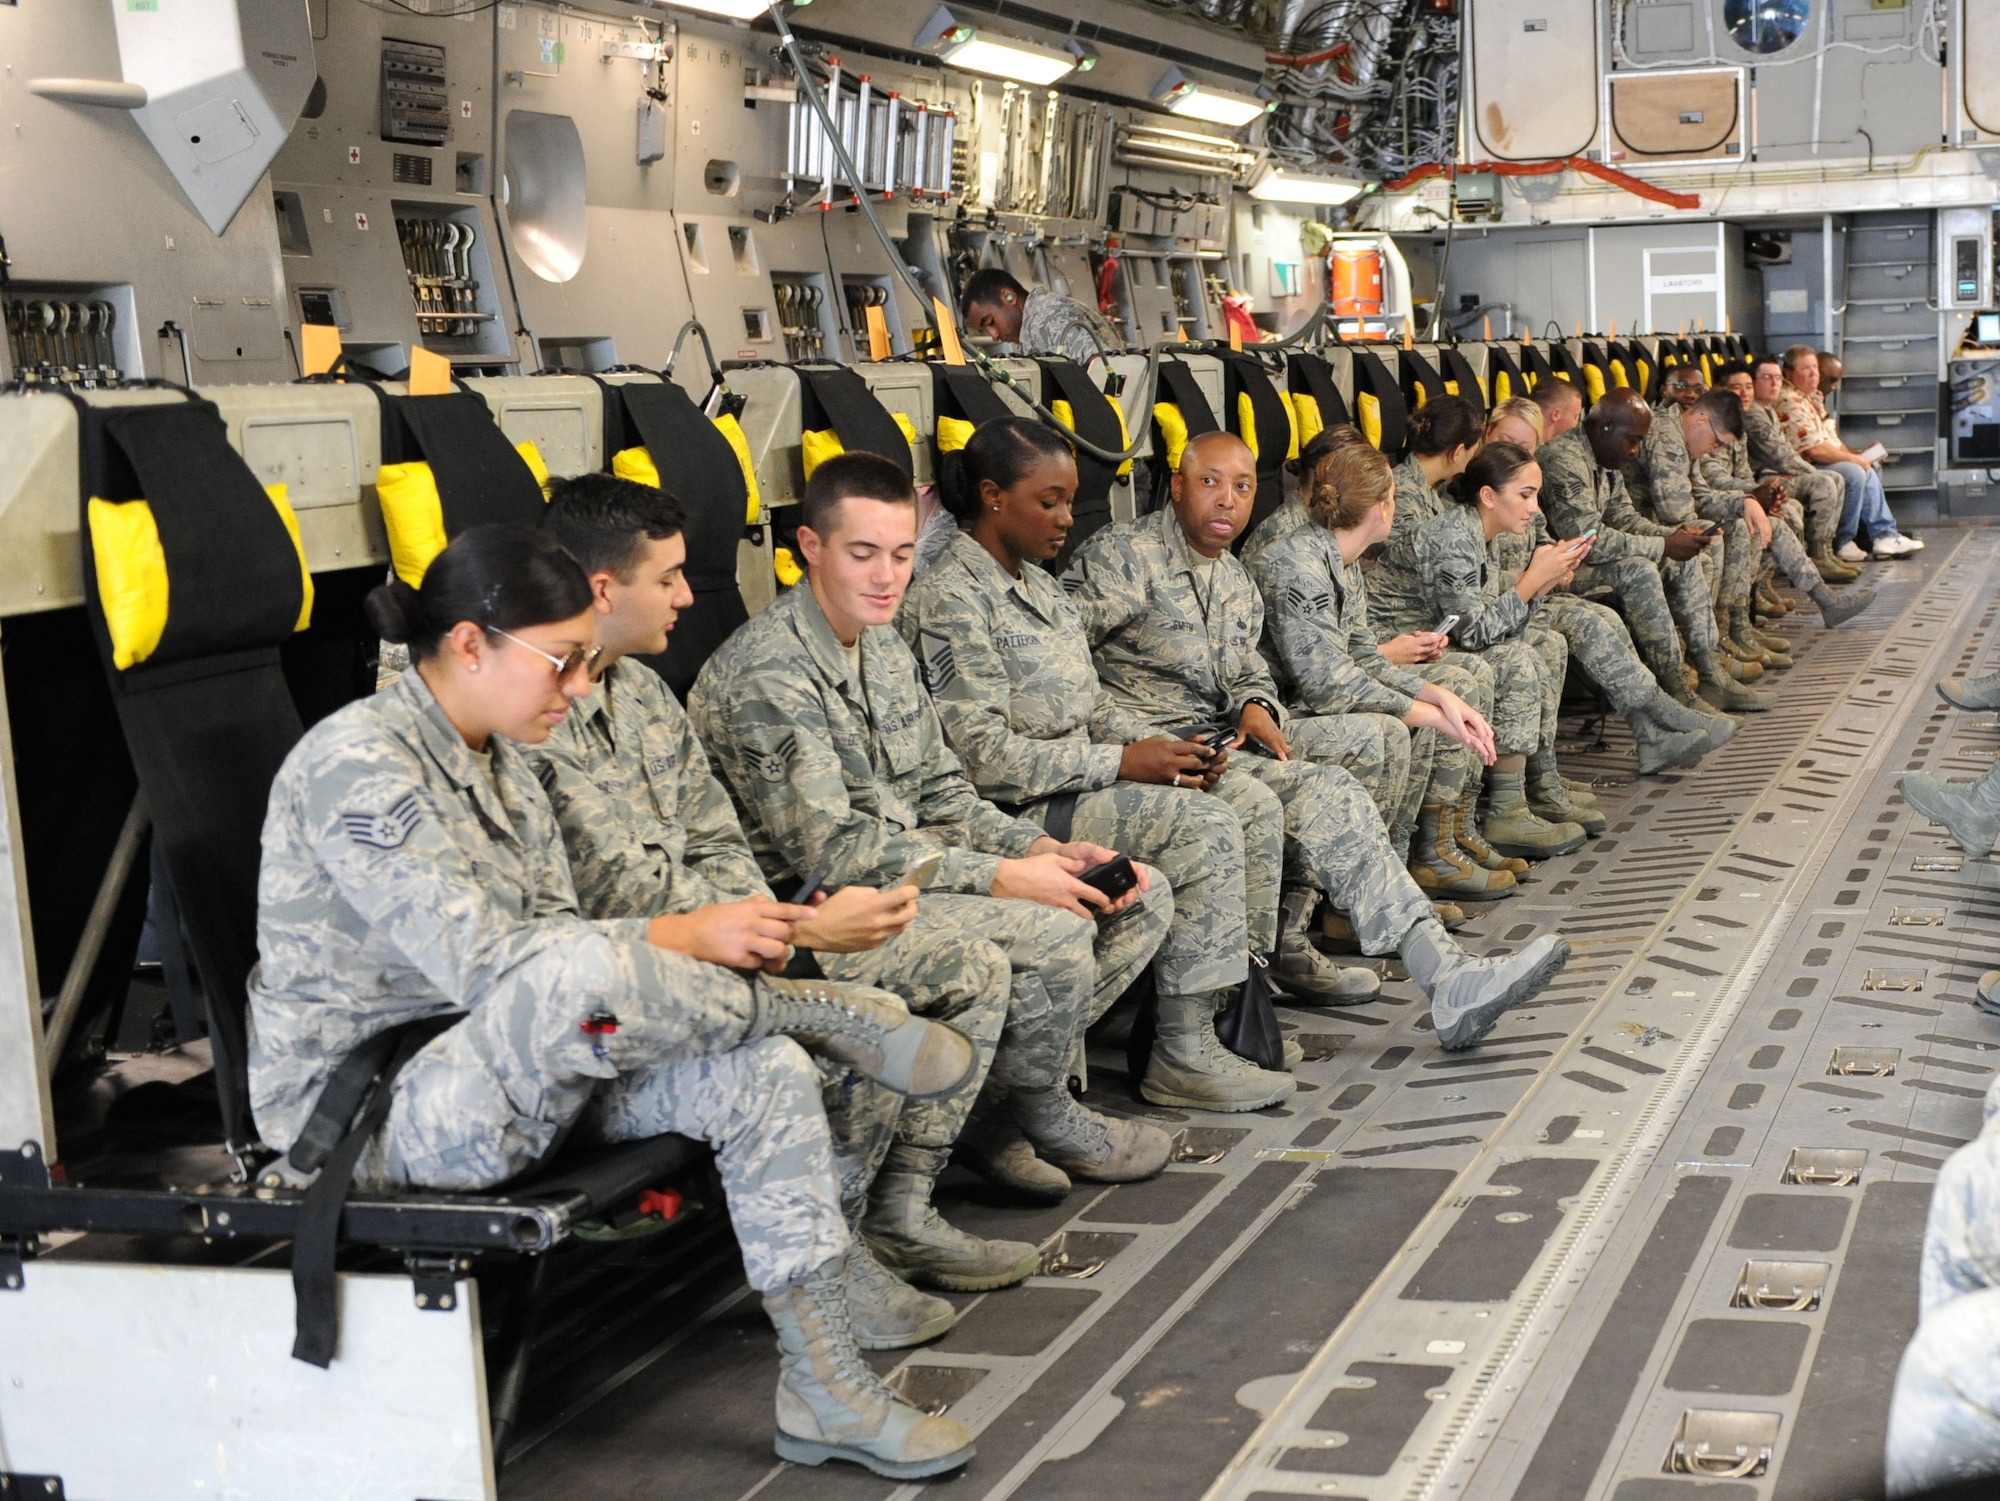 Keesler personnel sit aboard a C-17 Globemaster III from Altus Air Force Base, Okla. for evacuation during a hurricane exercise Aug. 4, 2016, on Keesler Air Force Base, Miss. The purpose of the exercise was to prepare Keesler for the current hurricane season. (U.S. Air Force photo by Kemberly Groue/Released)